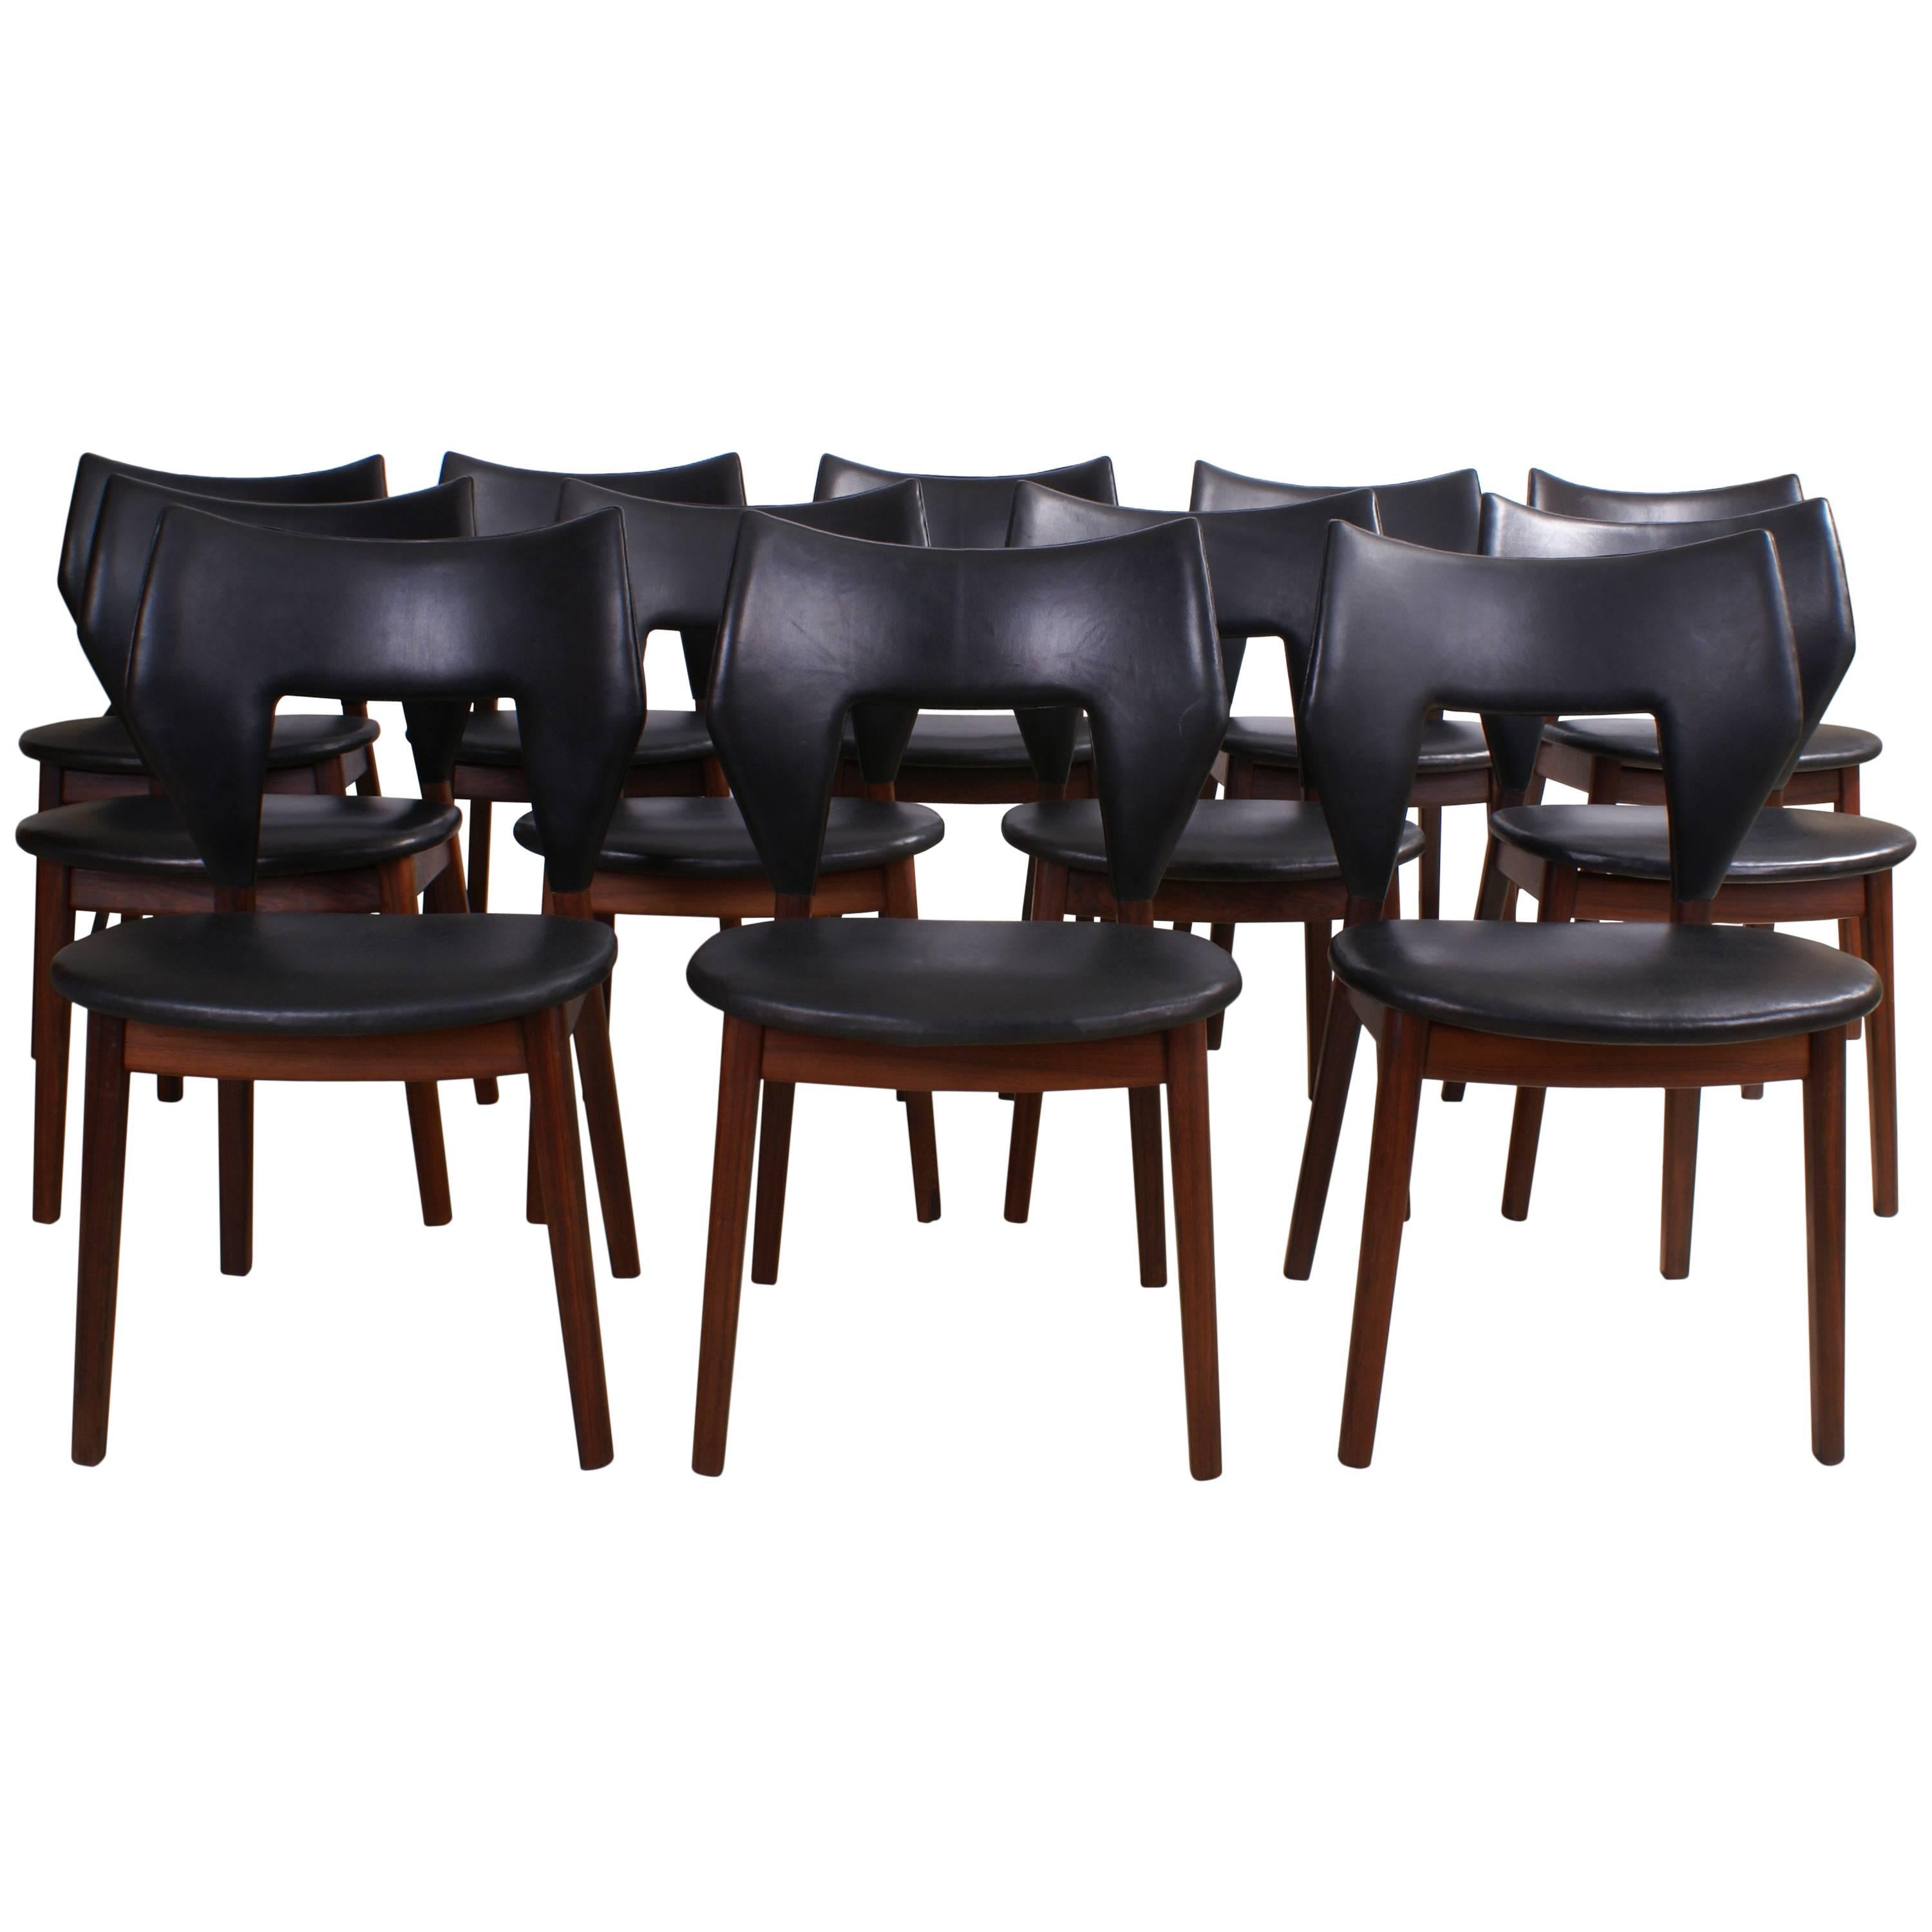 Tove & Edvard Kindt-Larsen Set of 12 Dining Chairs in Brazilian Rosewood For Sale